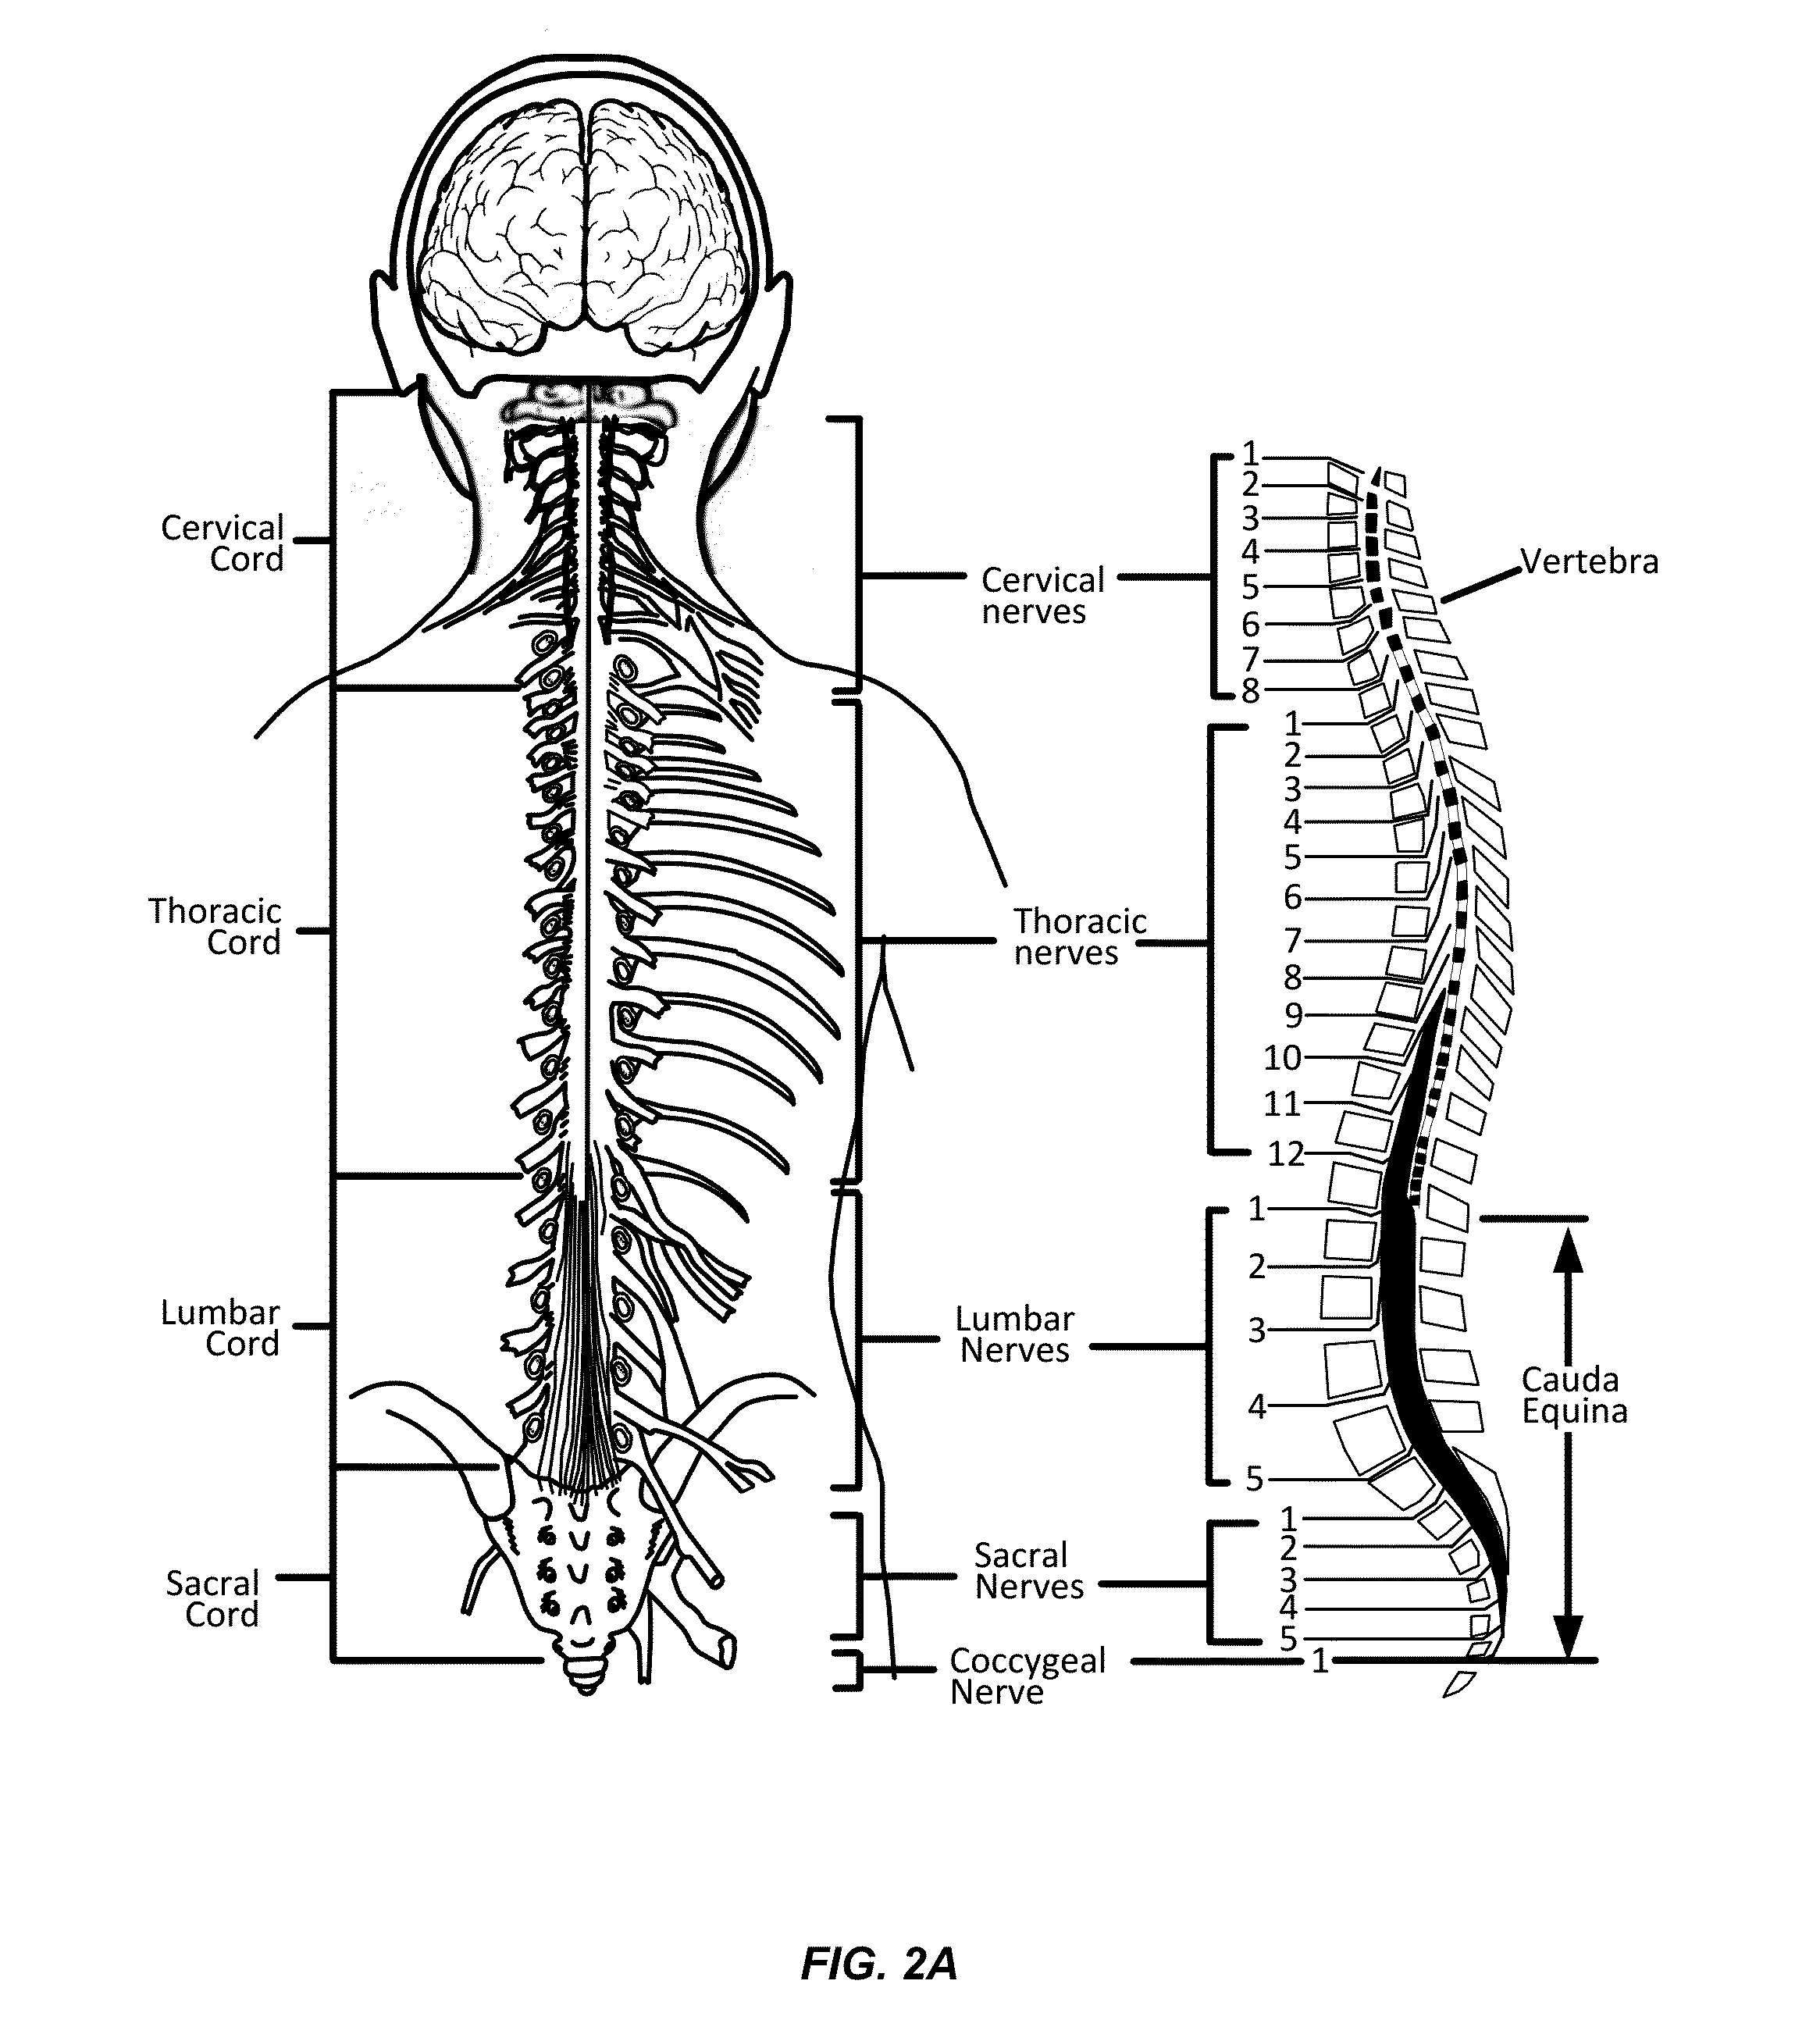 Integrated Electromyographic Clinician Programmer for Use with an Implantable Neurostimulator